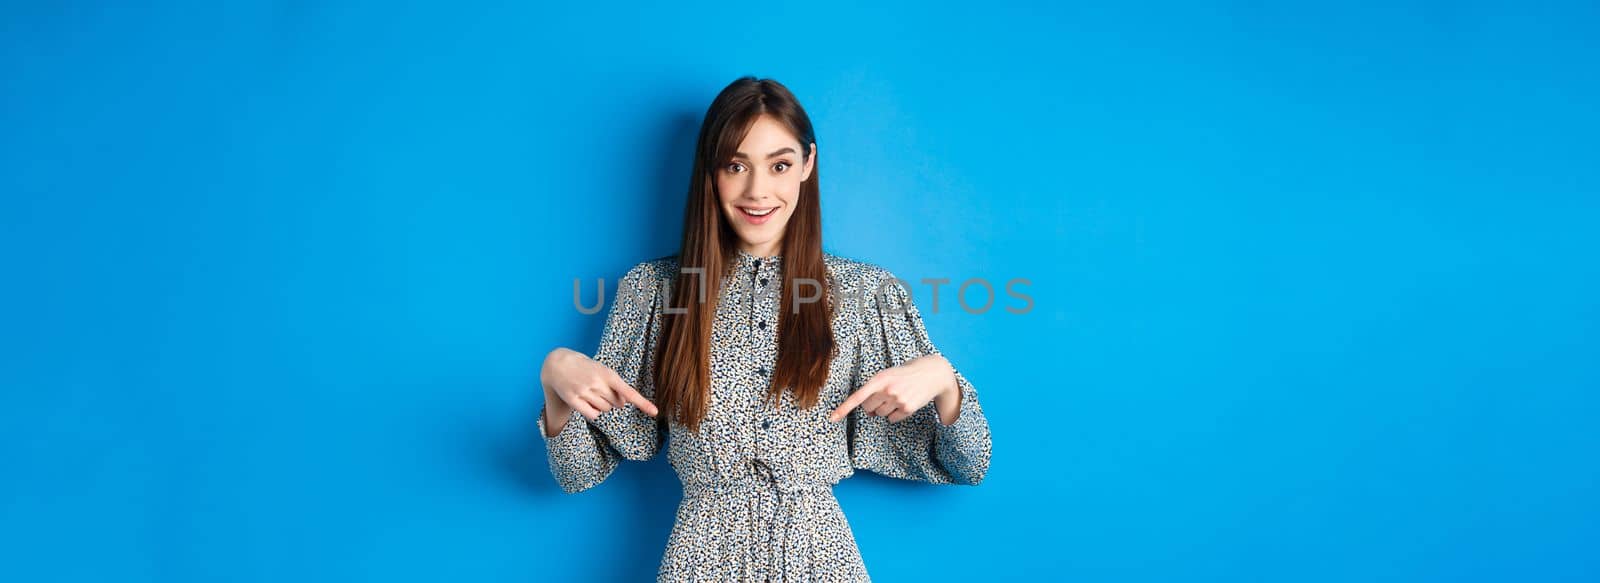 Excited caucasian woman in dress pointing fingers down at logo, showing fantastic news and smiling, standing on blue background.